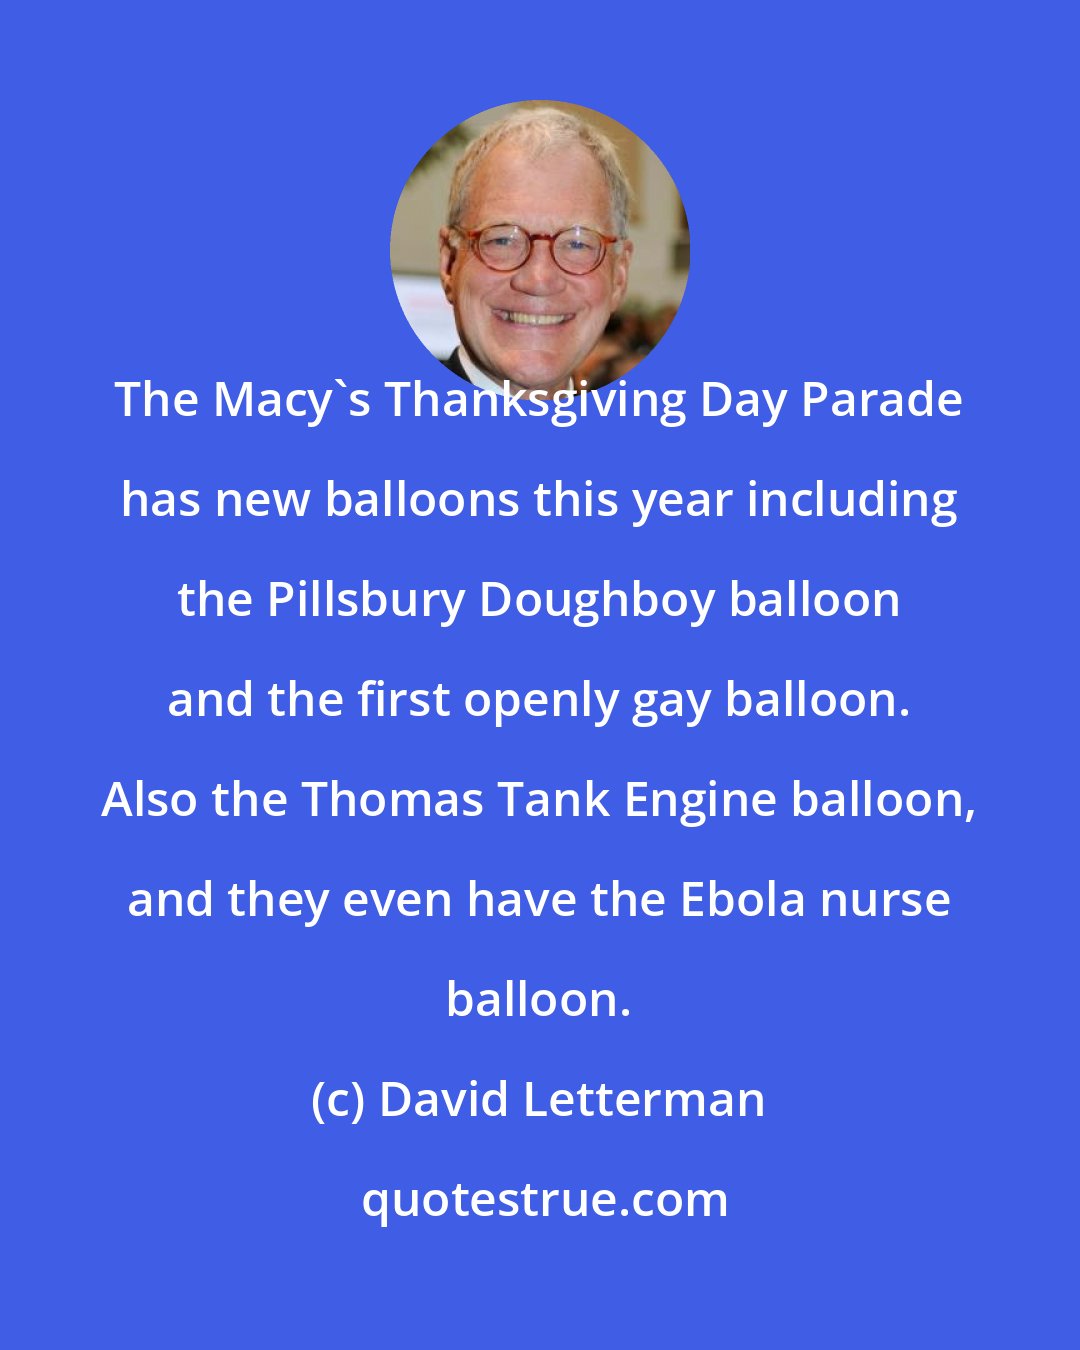 David Letterman: The Macy's Thanksgiving Day Parade has new balloons this year including the Pillsbury Doughboy balloon and the first openly gay balloon. Also the Thomas Tank Engine balloon, and they even have the Ebola nurse balloon.